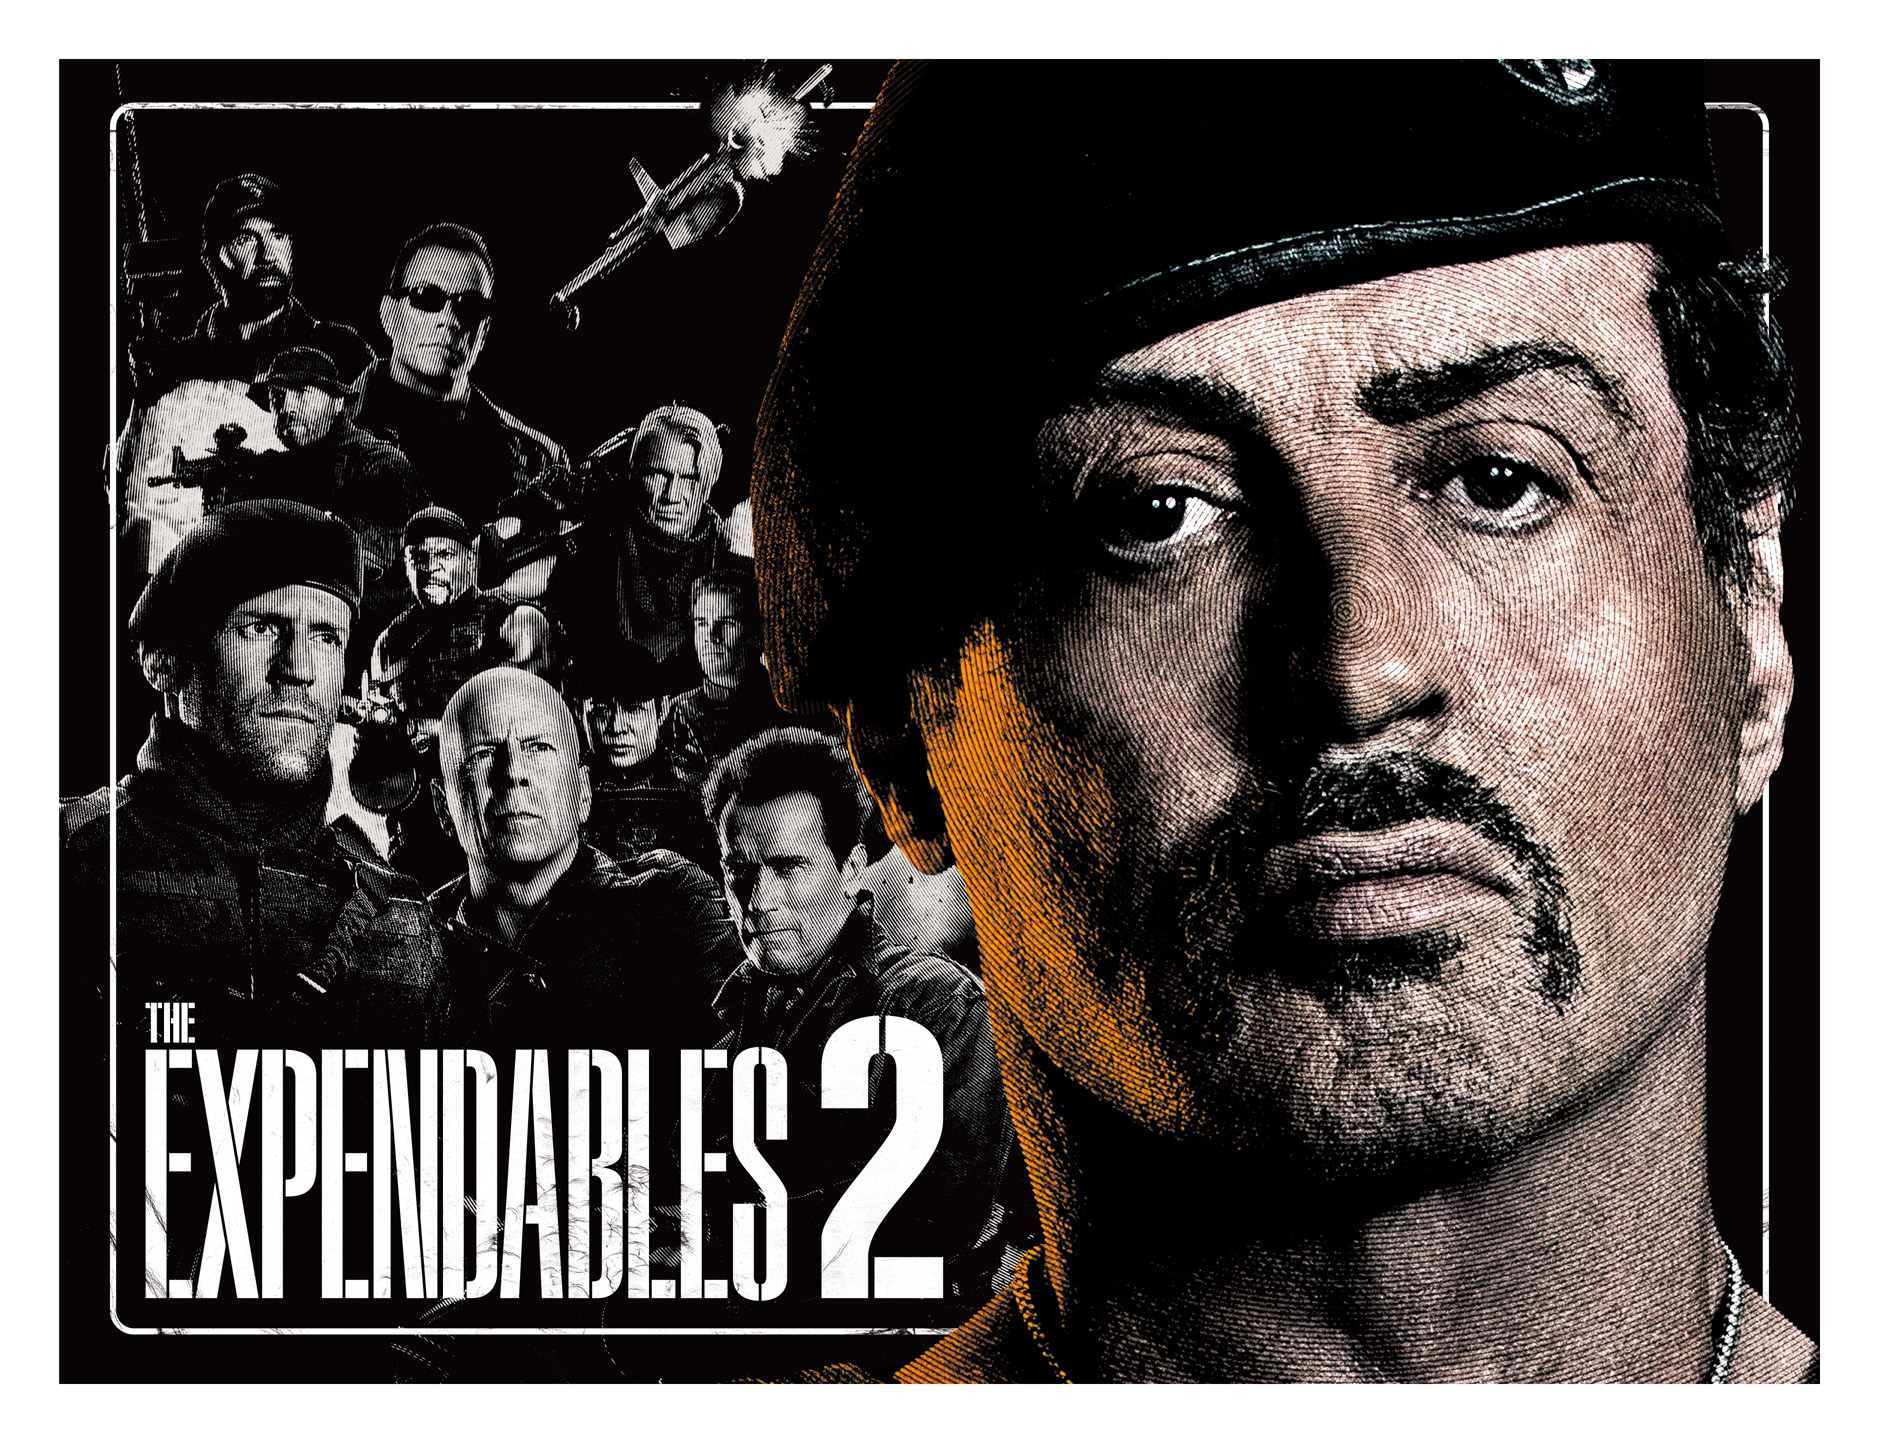 THE EXPENDABLES 2 劇場パンフレット表紙デザイン